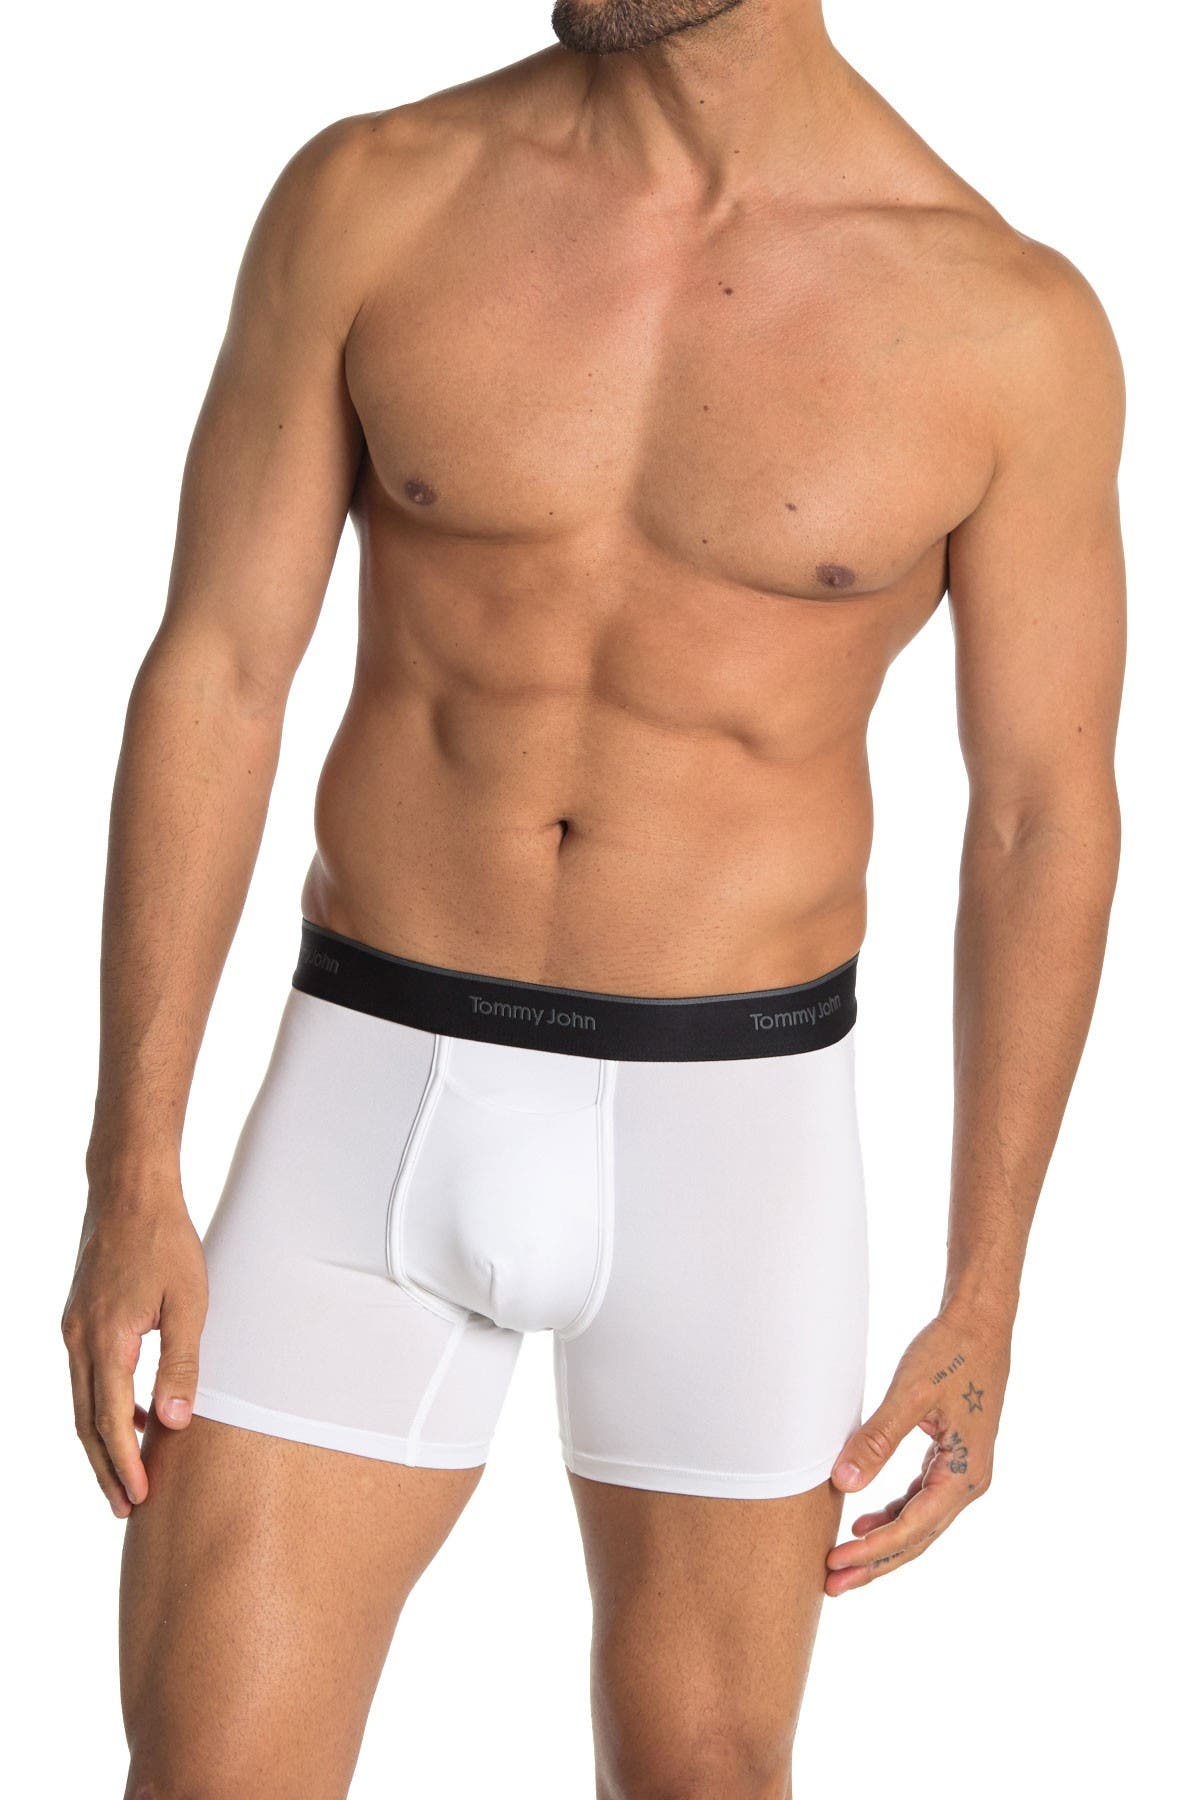 tommy john go anywhere boxer brief